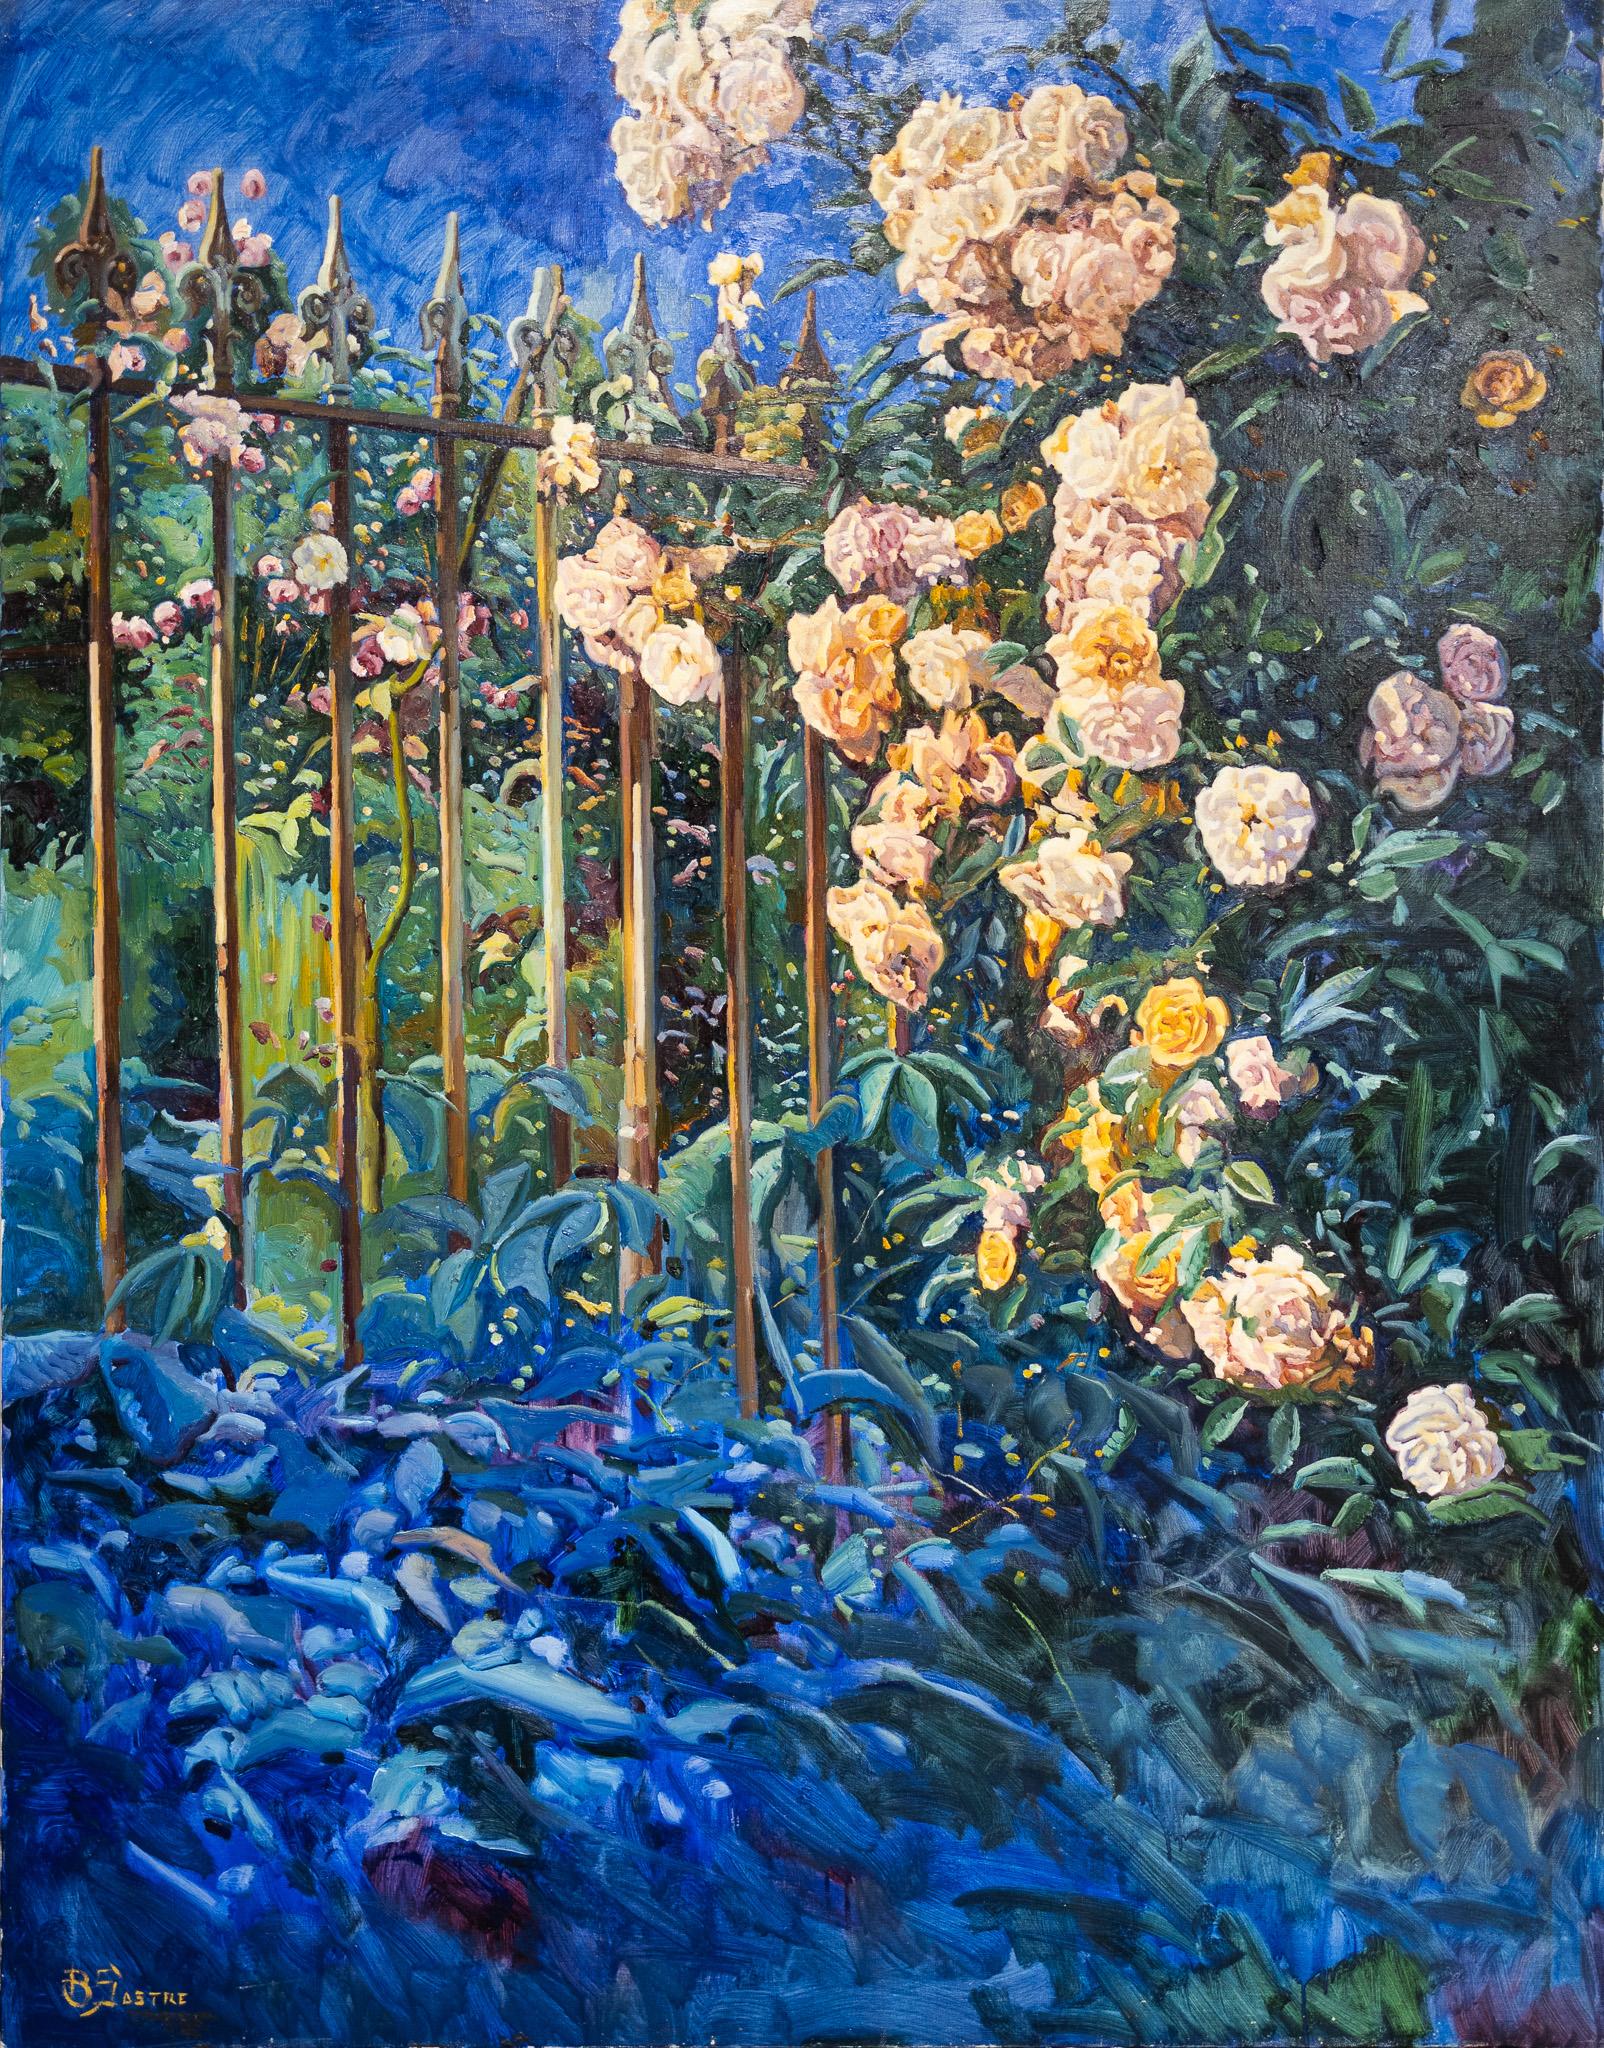 Bartolome Sastre Landscape Painting - "Rosas" Bright Floral Rose Scene with Wrought Iron Fence